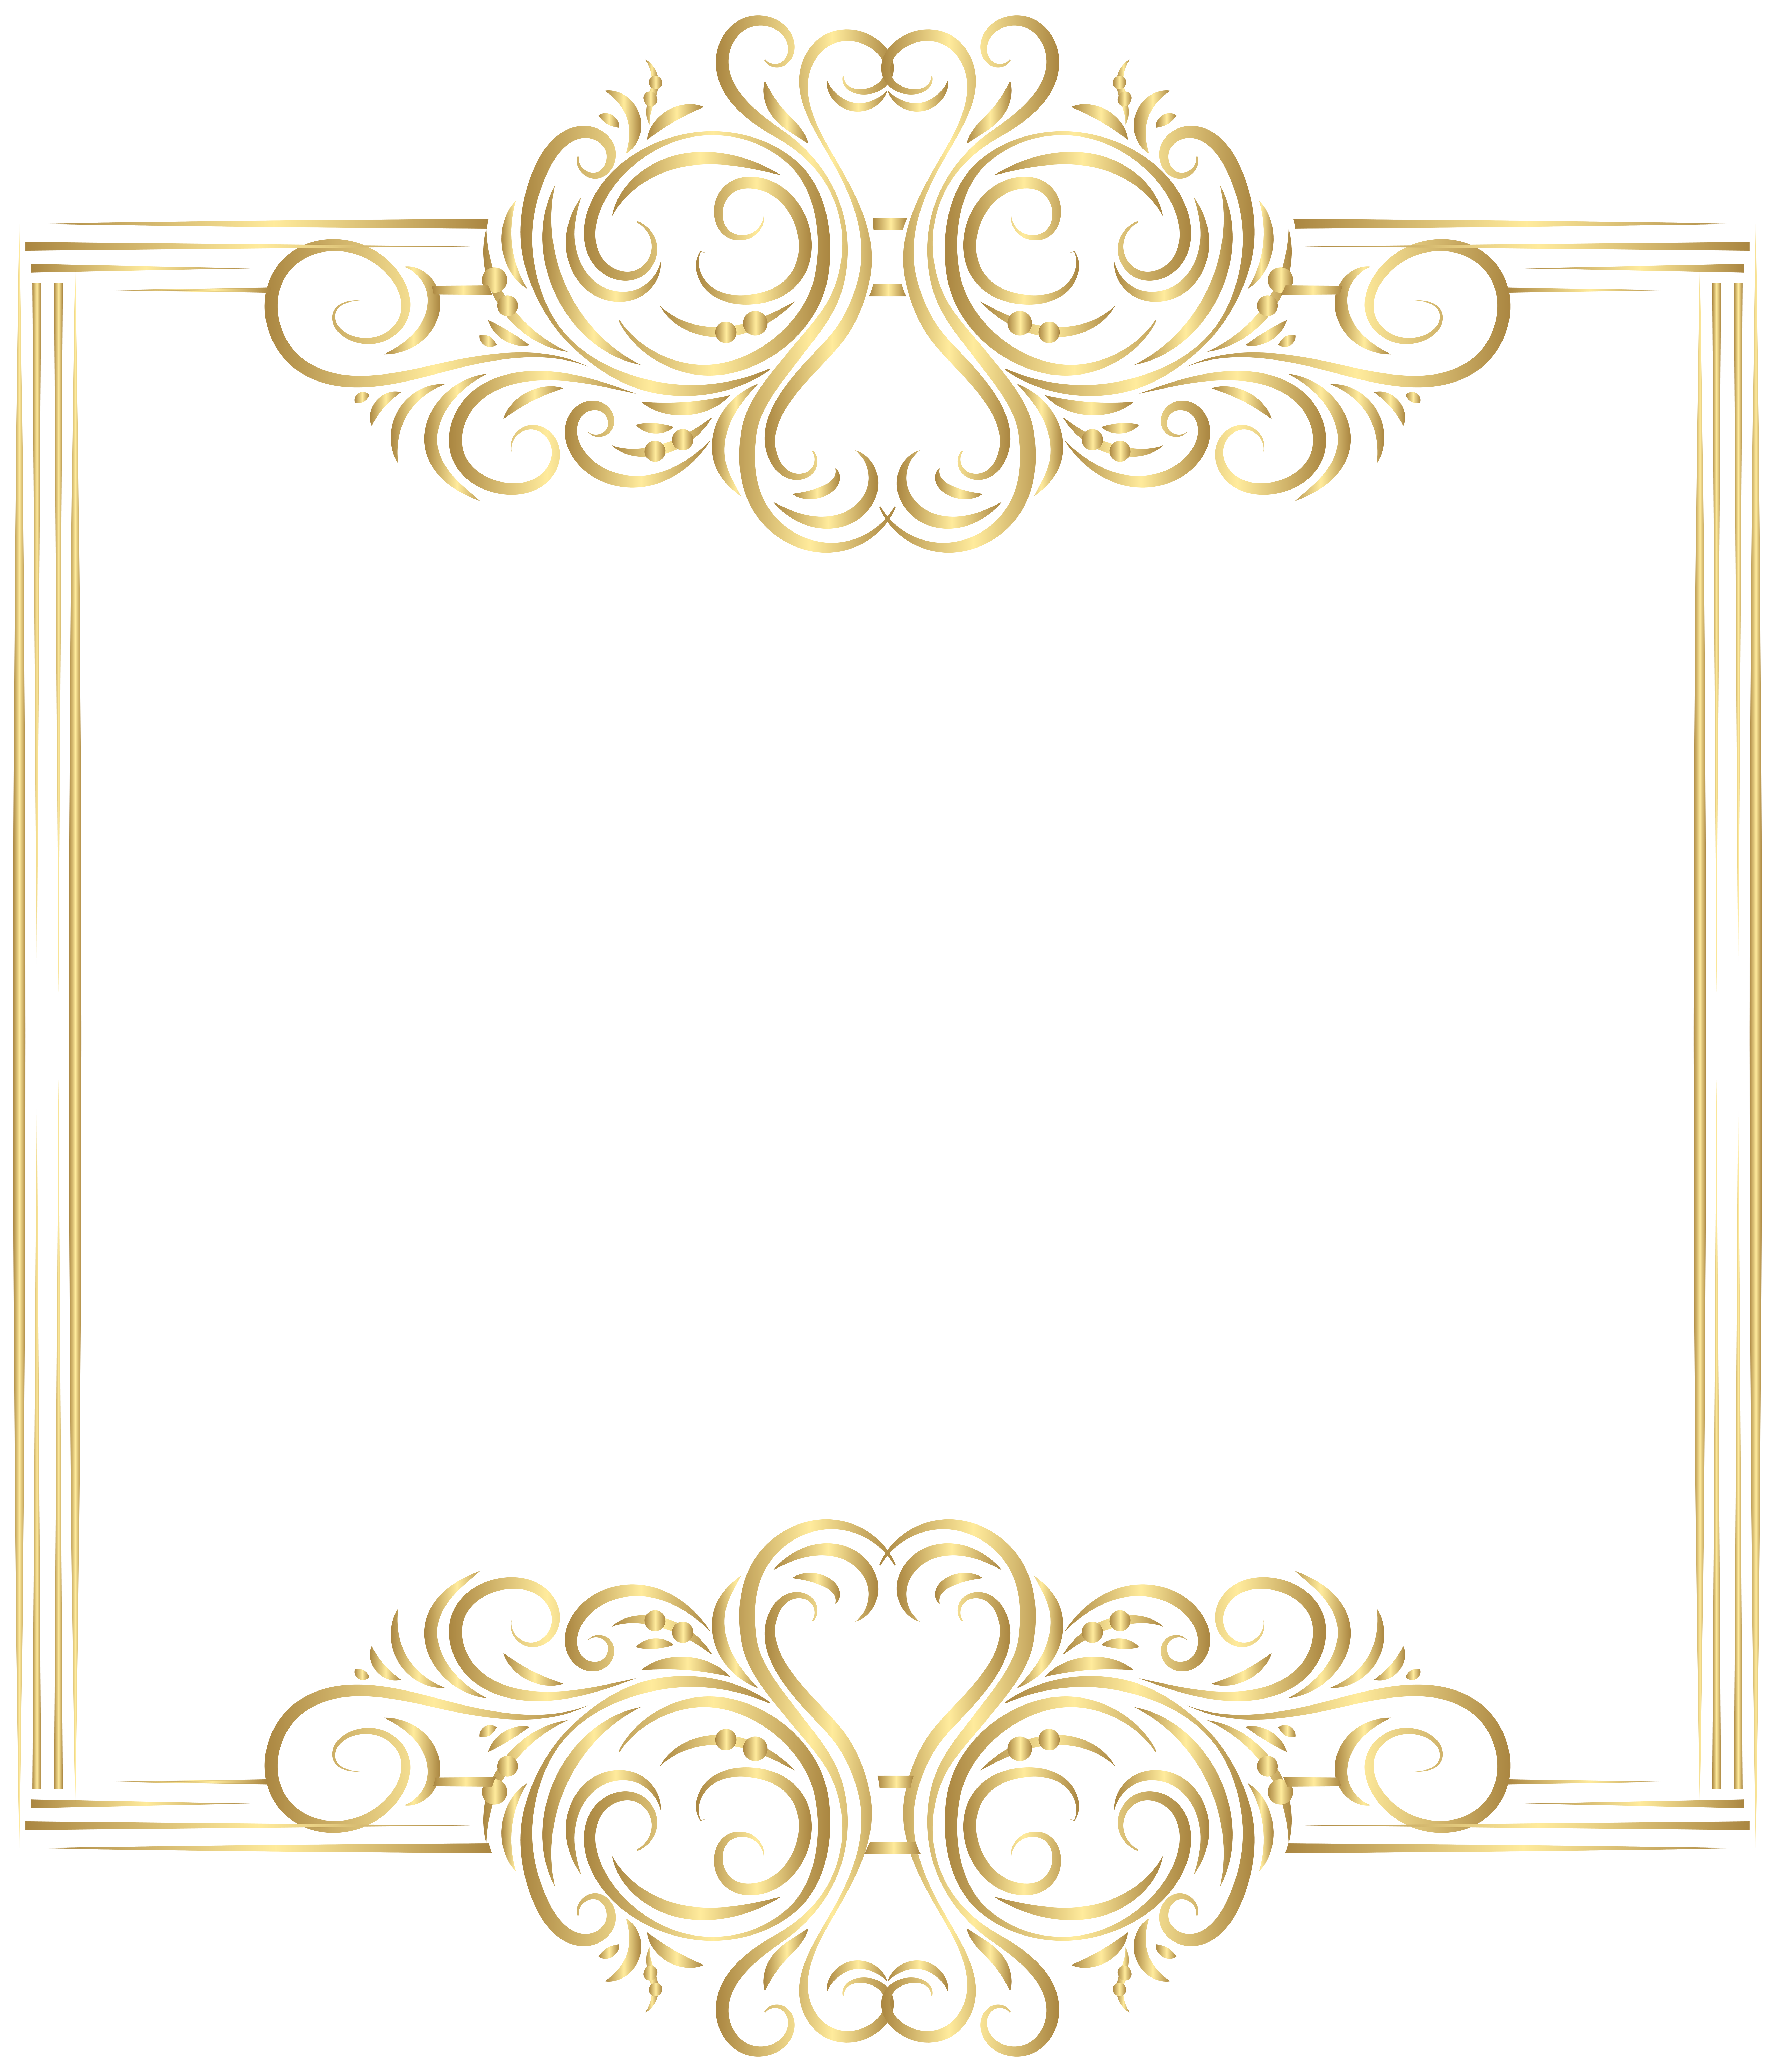 Frame Border Gold PNG Image High Quality Clipart